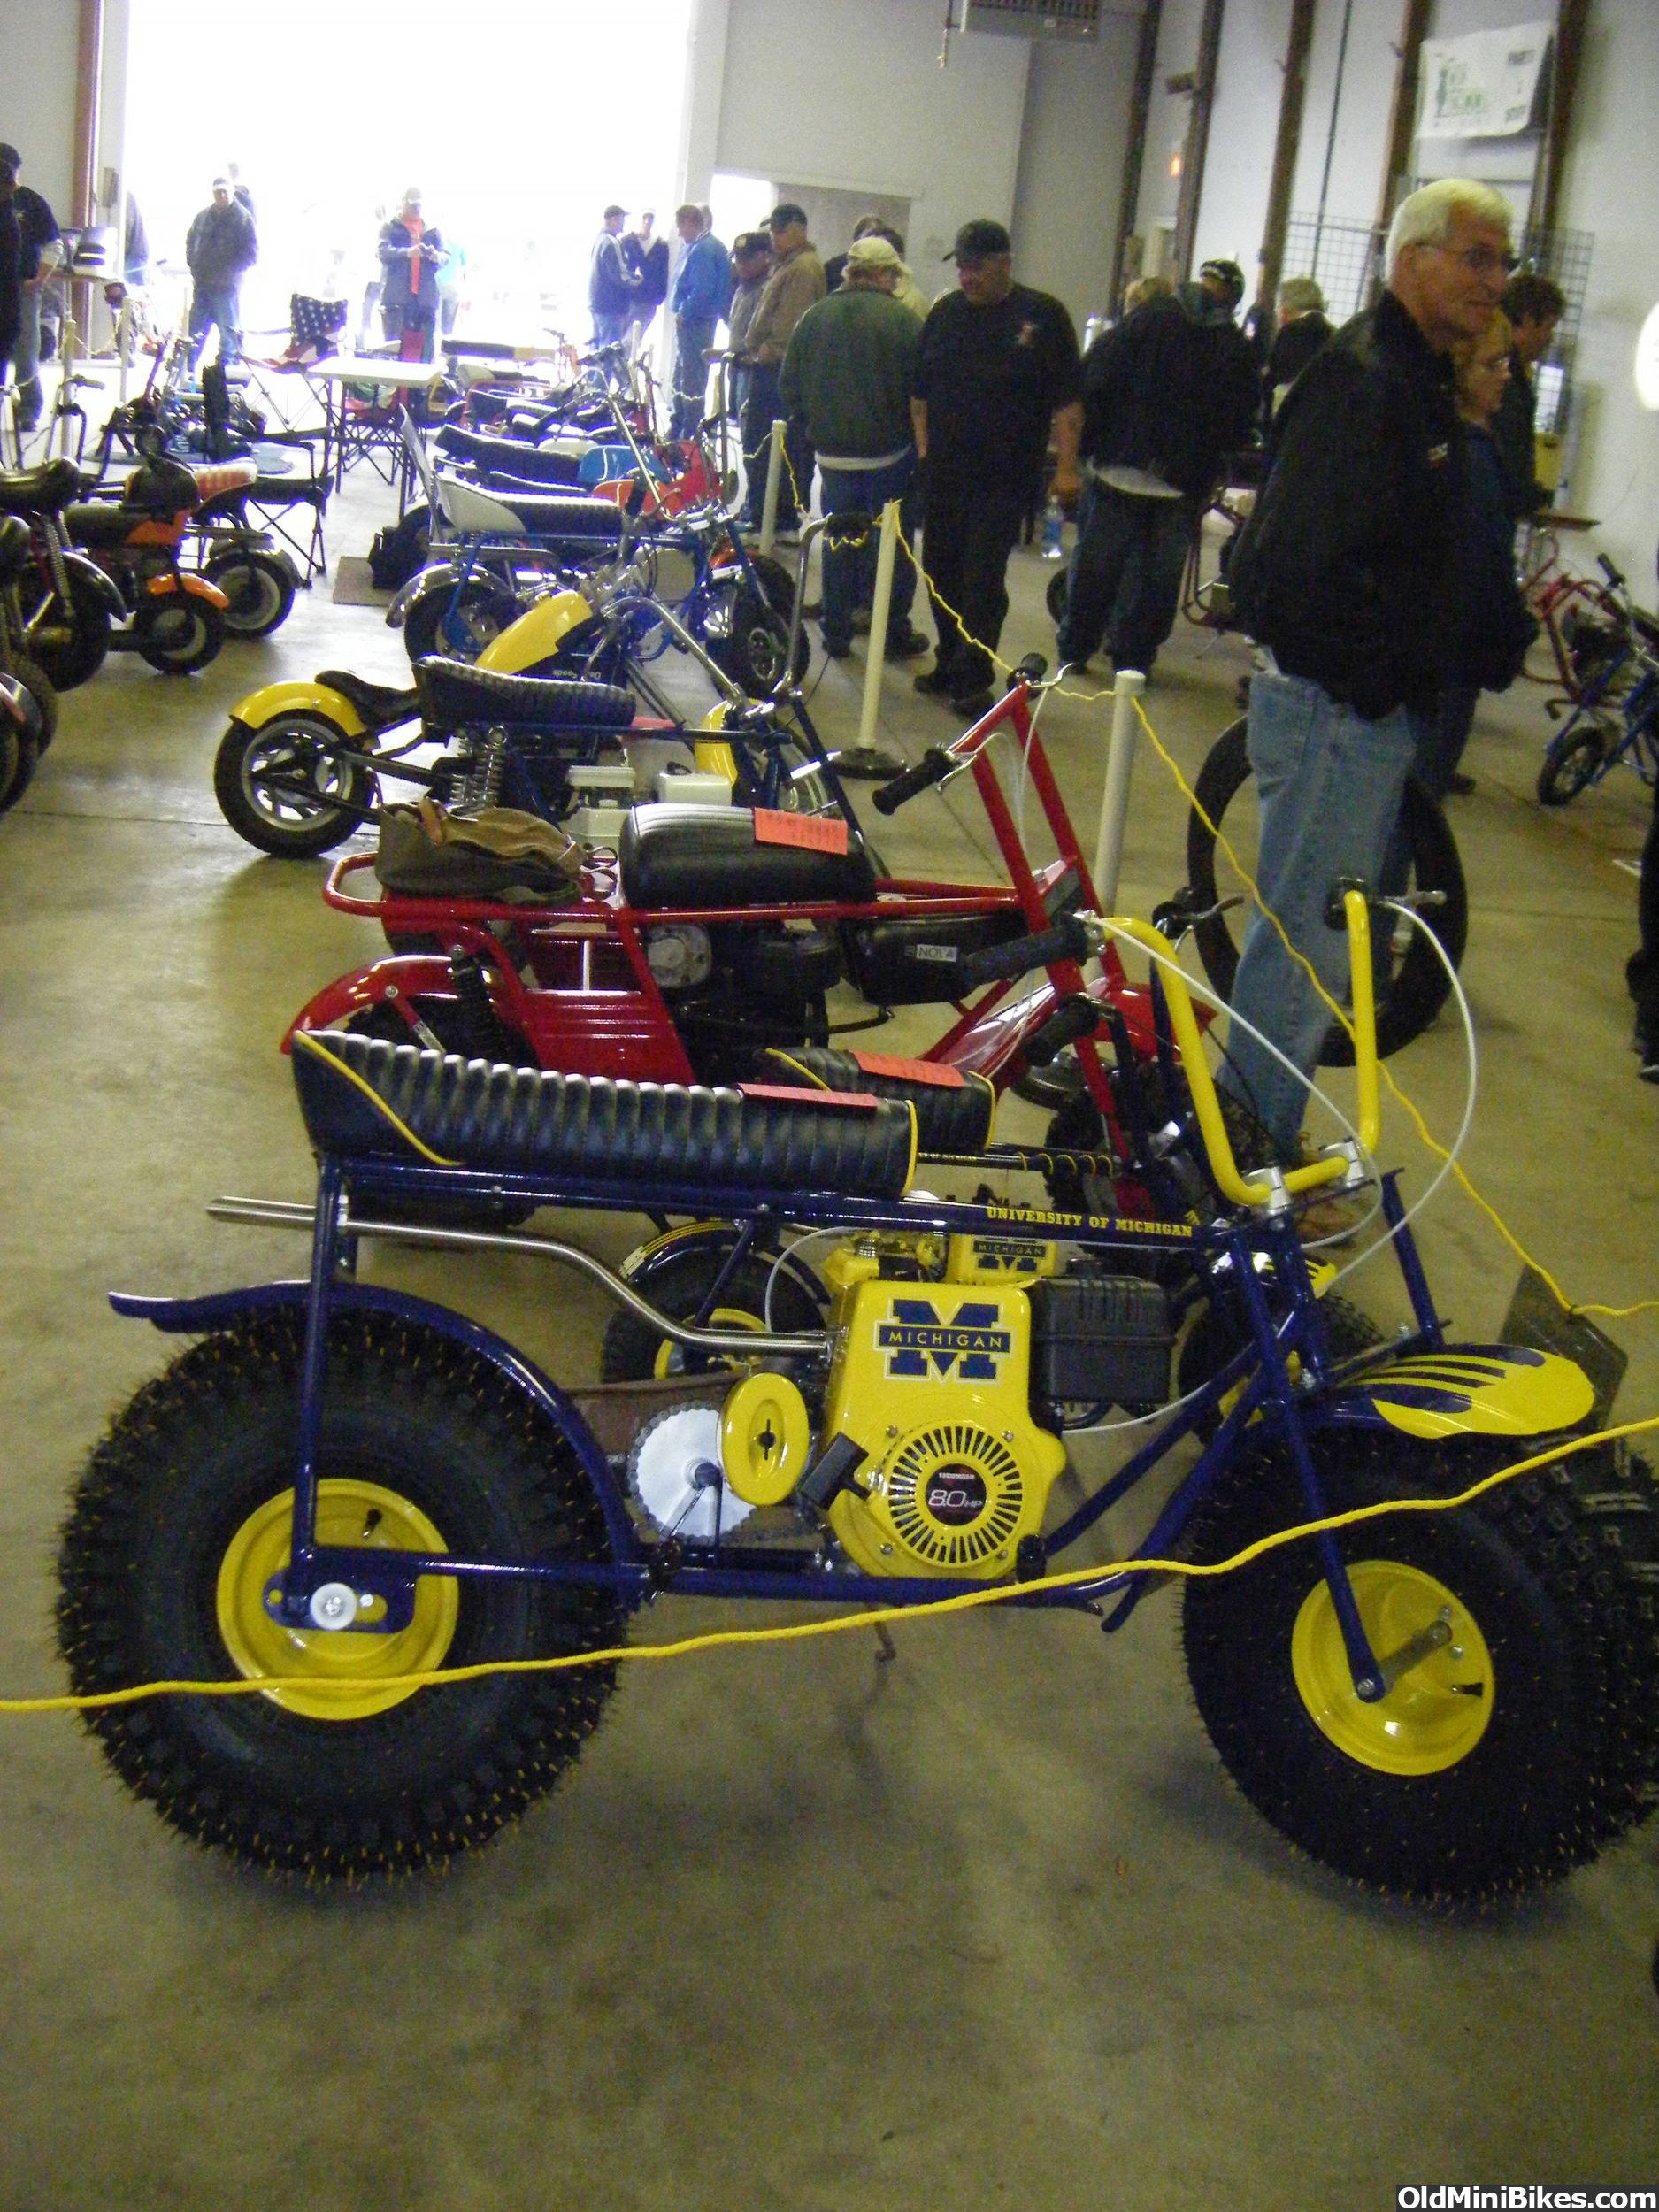 Pictures, 2010 Old School minibike show | OldMiniBikes.com